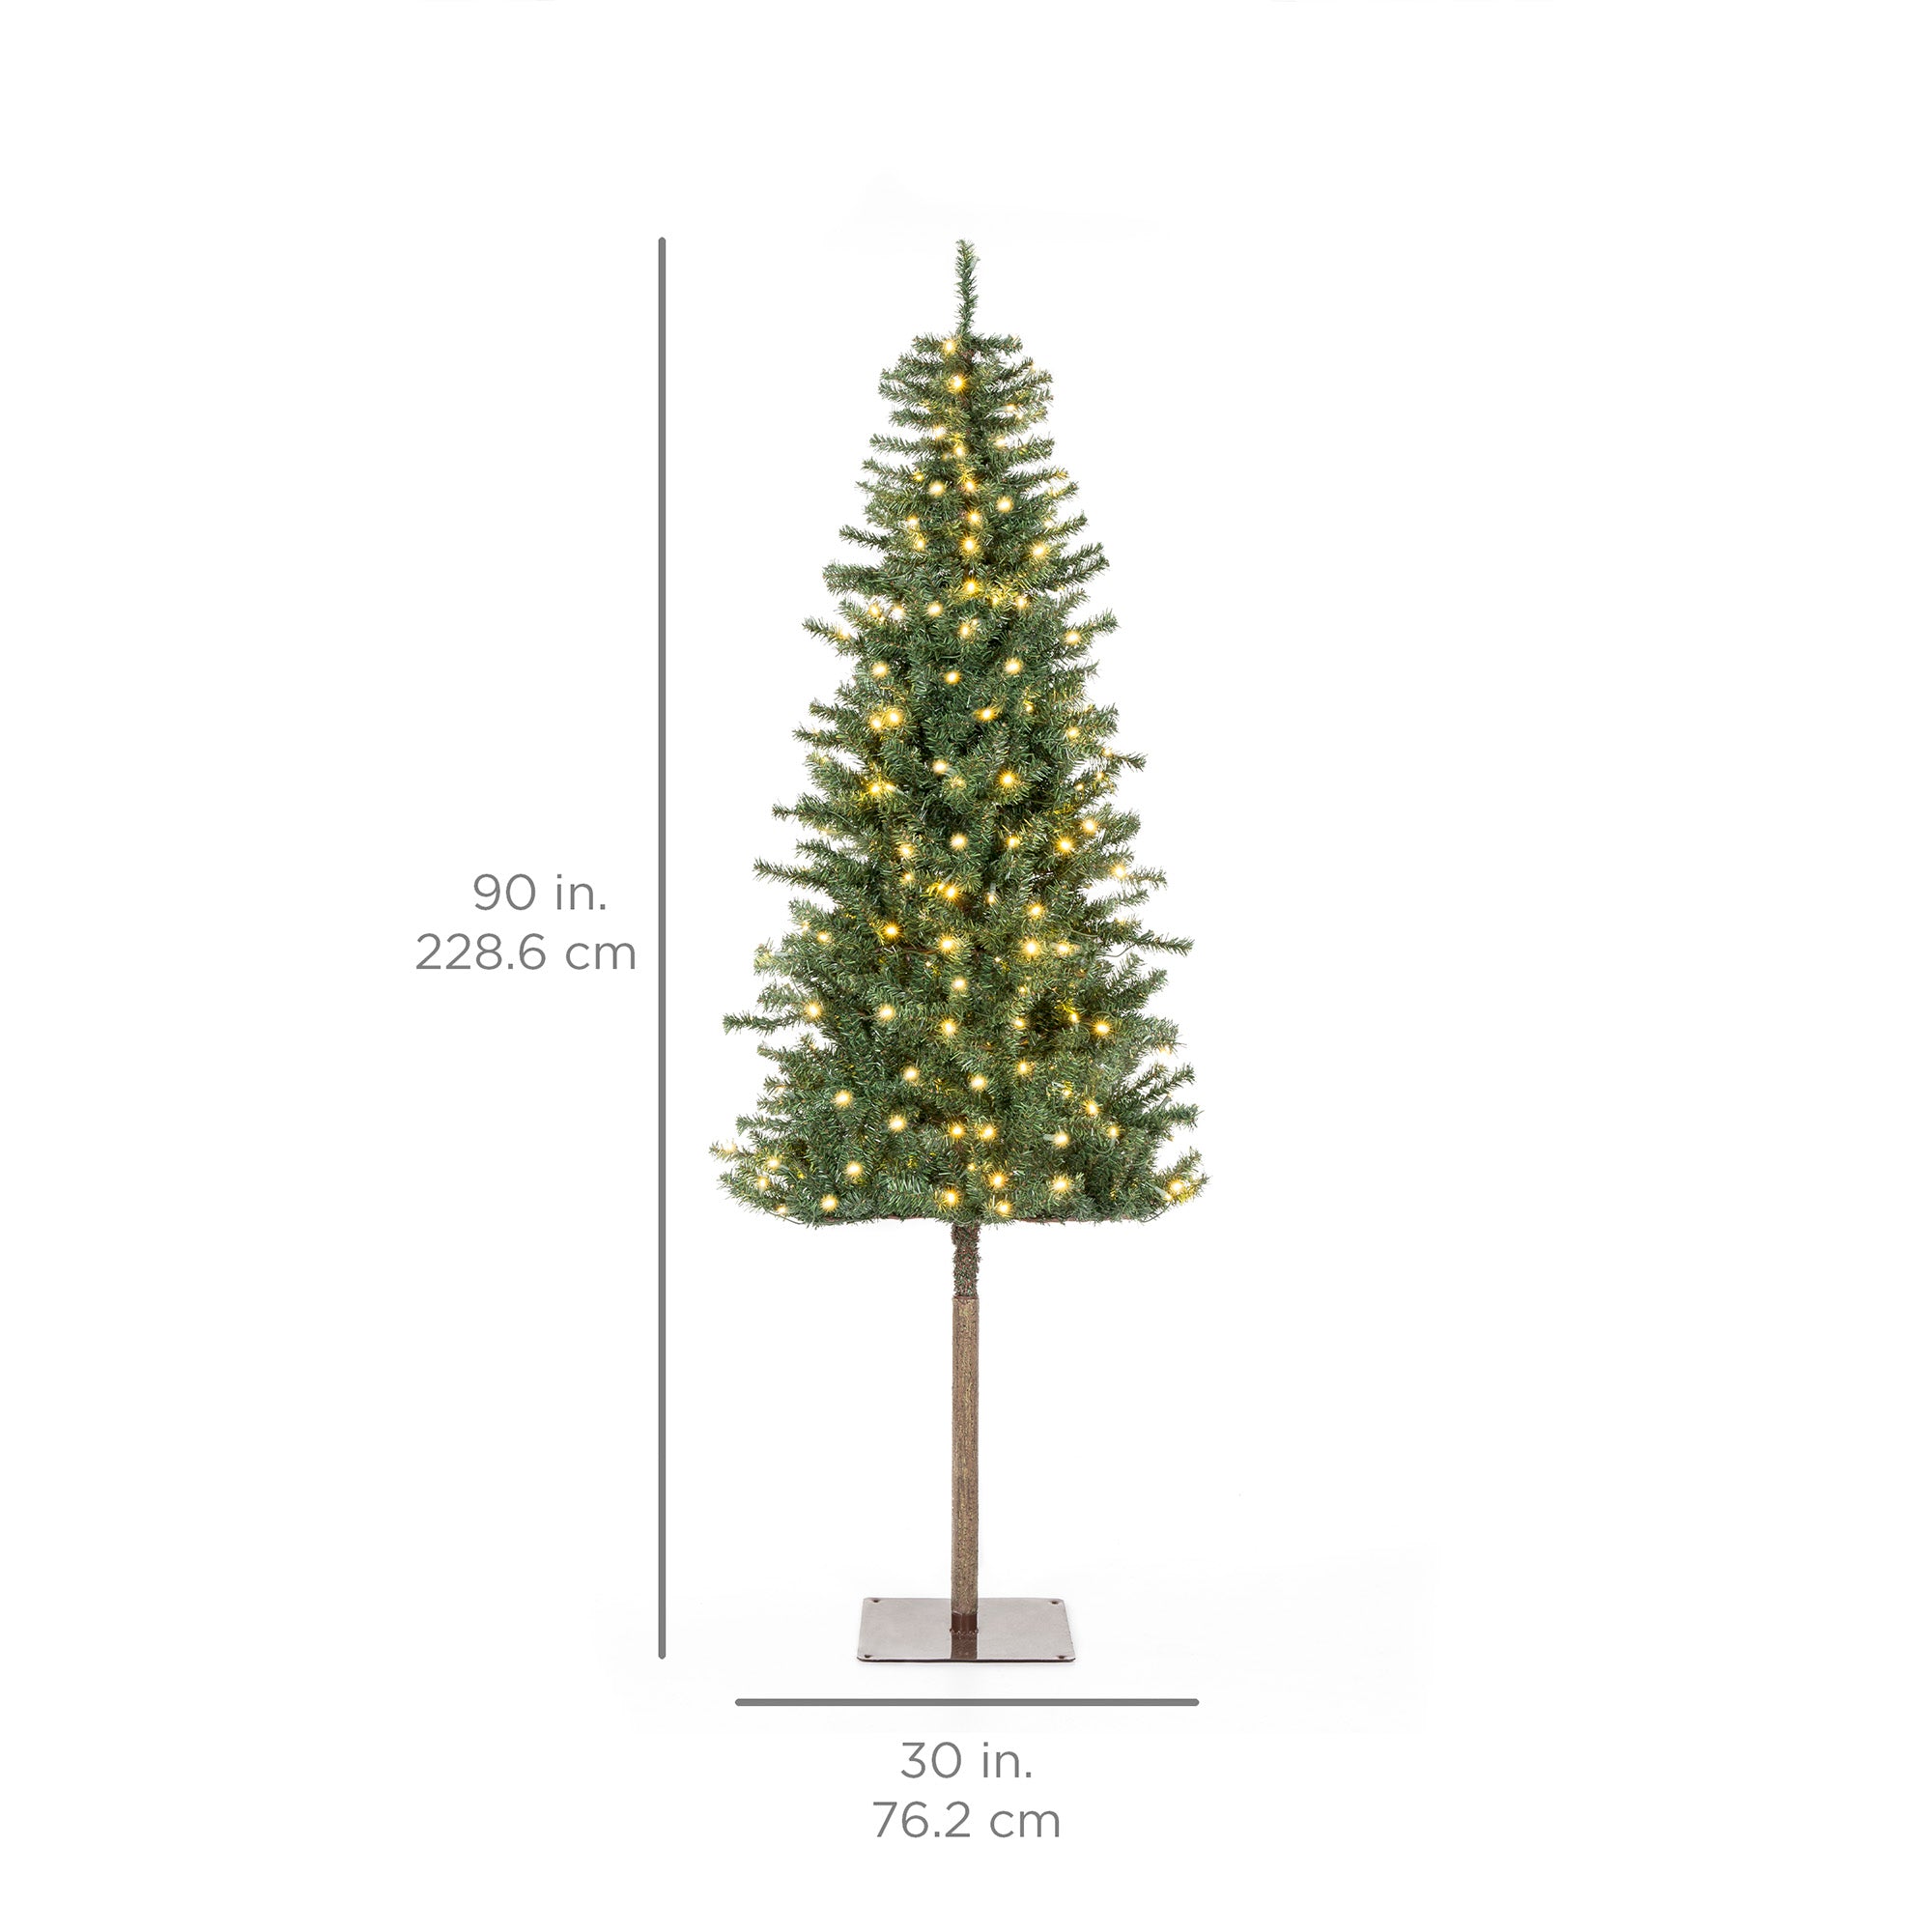 Best Choice Products 6ft Pre-Lit Spruce Hinged Artificial Christmas Tree w/ 250 Incandescent Lights Foldable Stand